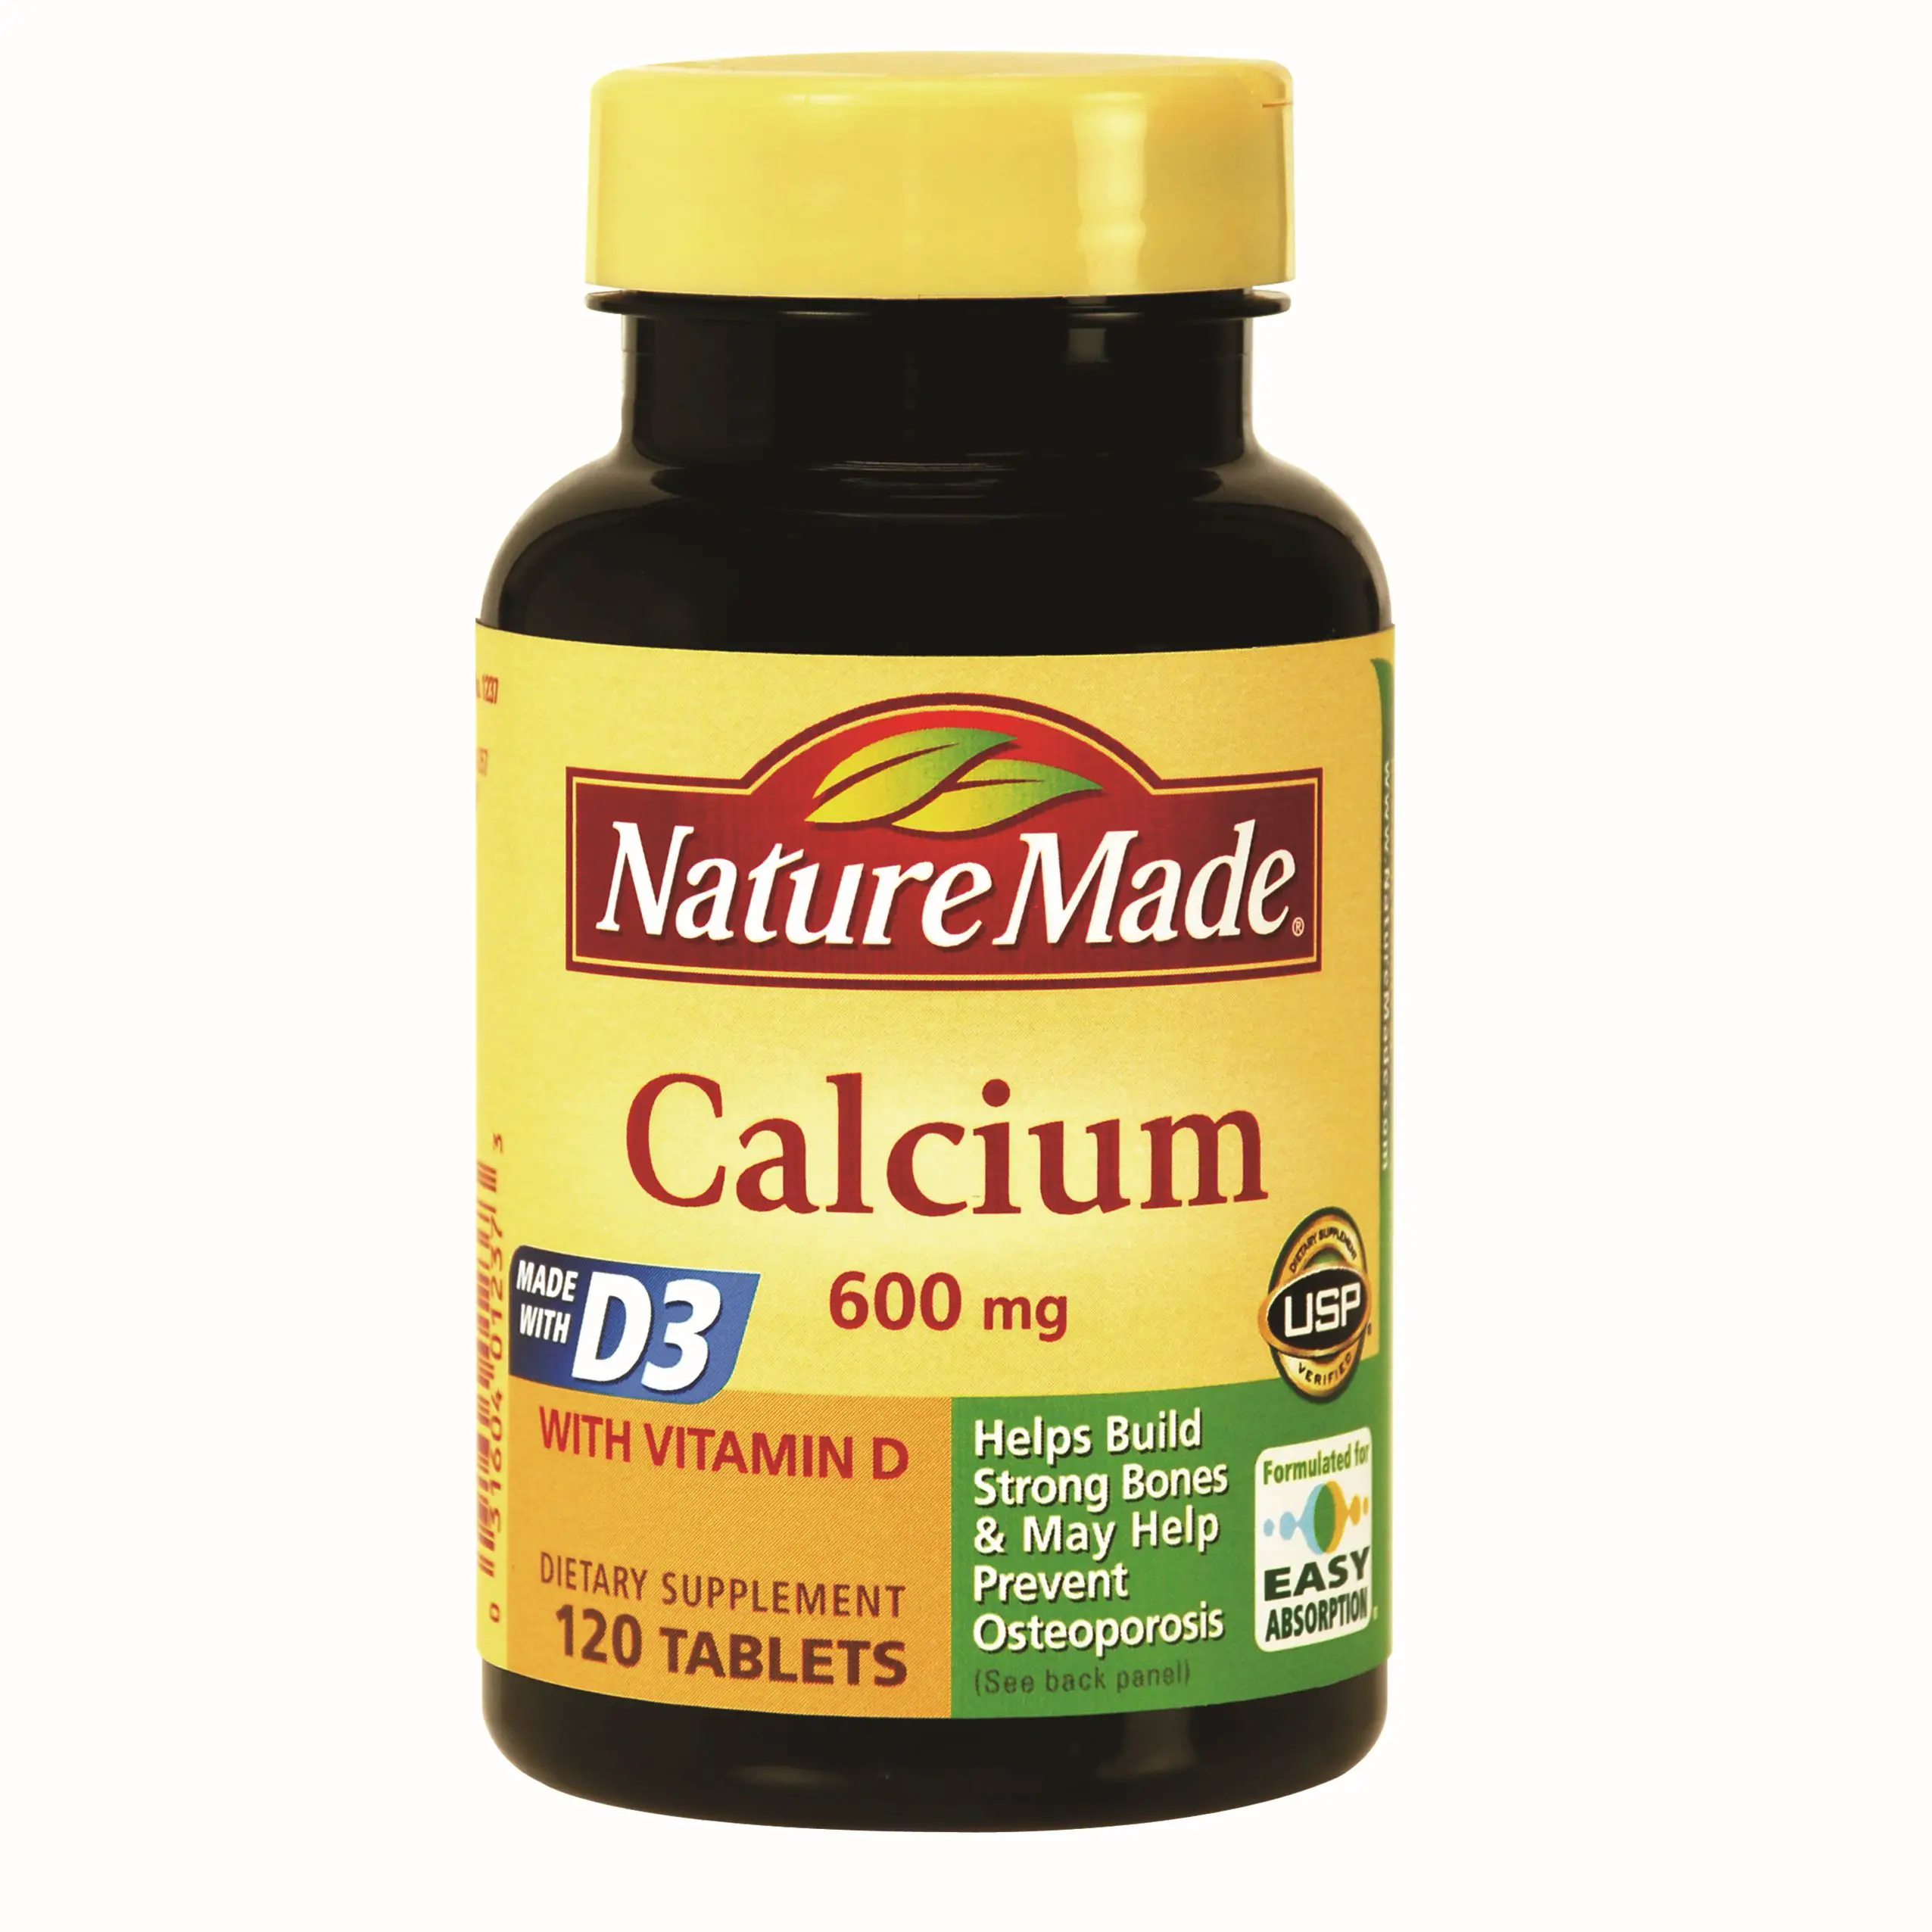 Nature Made Calcium 600 mg with Vitamin D, 120 Tablets